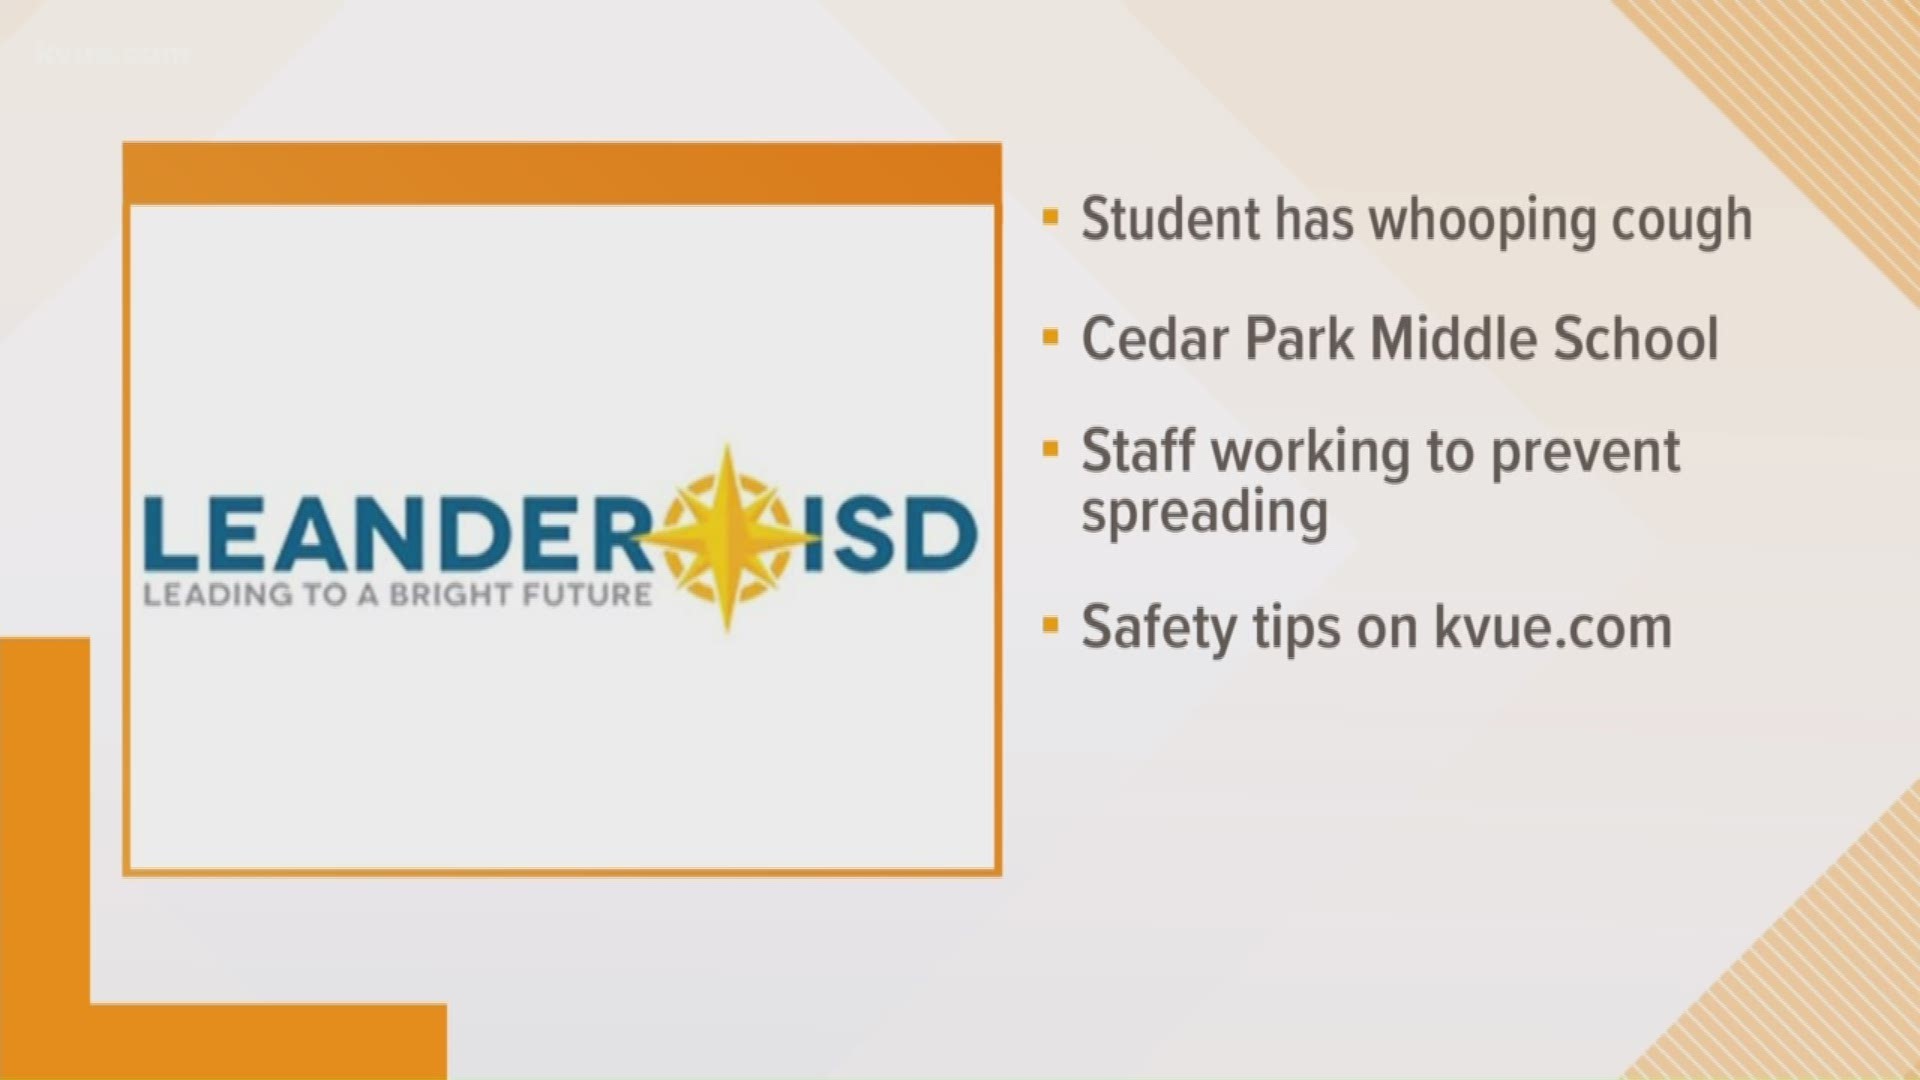 Leander ISD sent a letter Monday, informing parents and staff of Cedar Park Middle School of the student's illness and advising them to consult with their children's physician due to whooping cough exposure for medical care other than observation of signs of whooping cough.